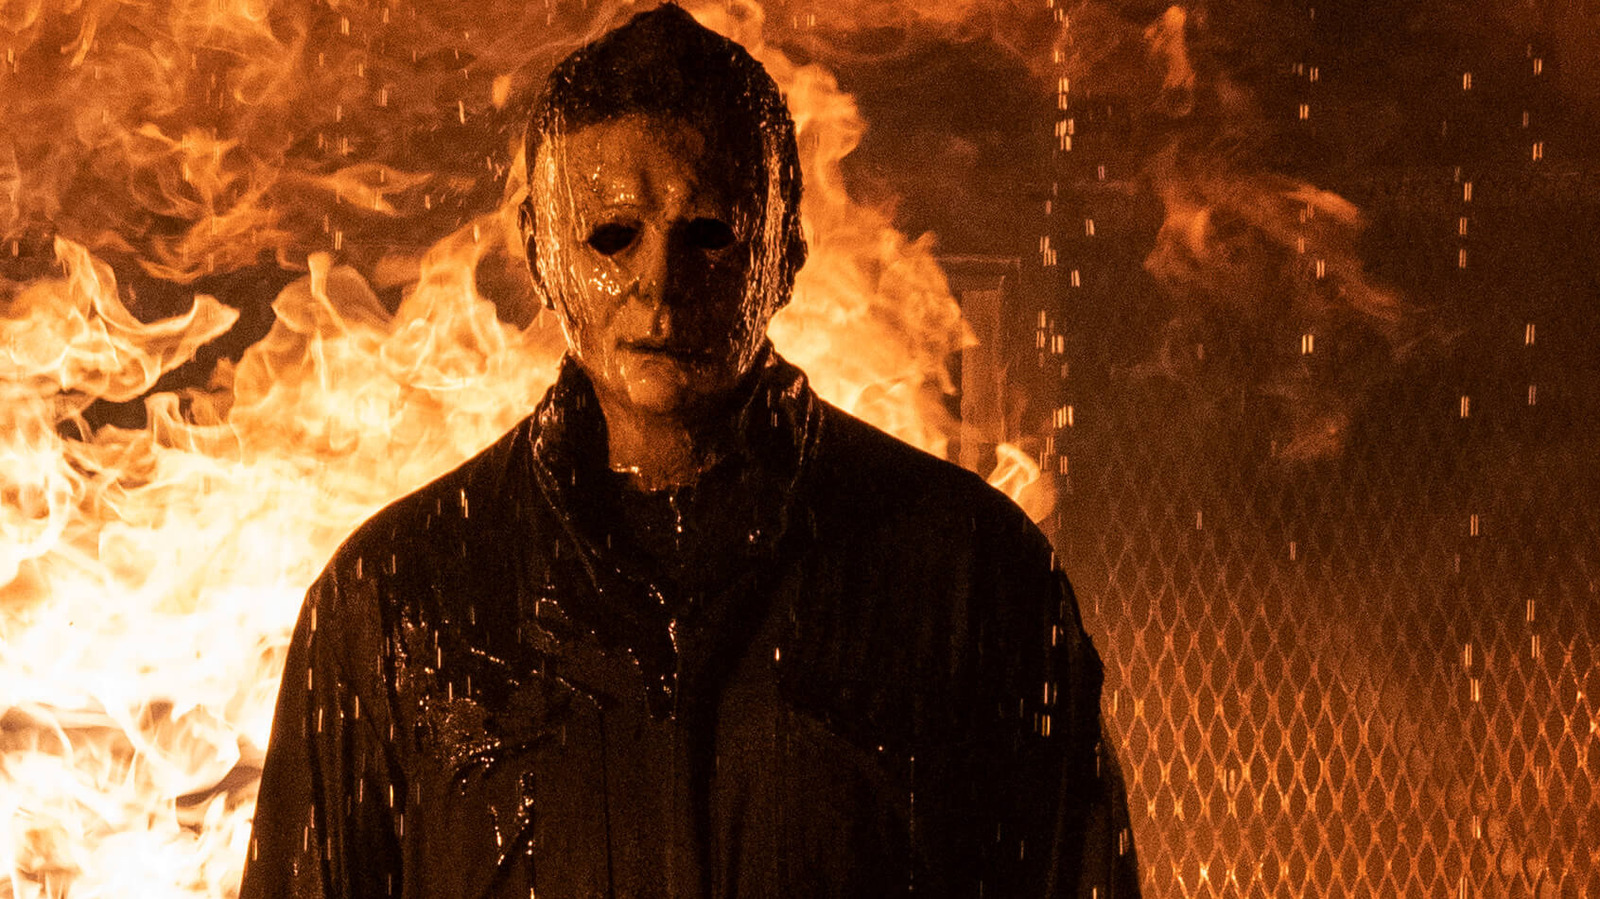 #Halloween Ends Has, Well, Ended As Production Wraps On The Trilogy